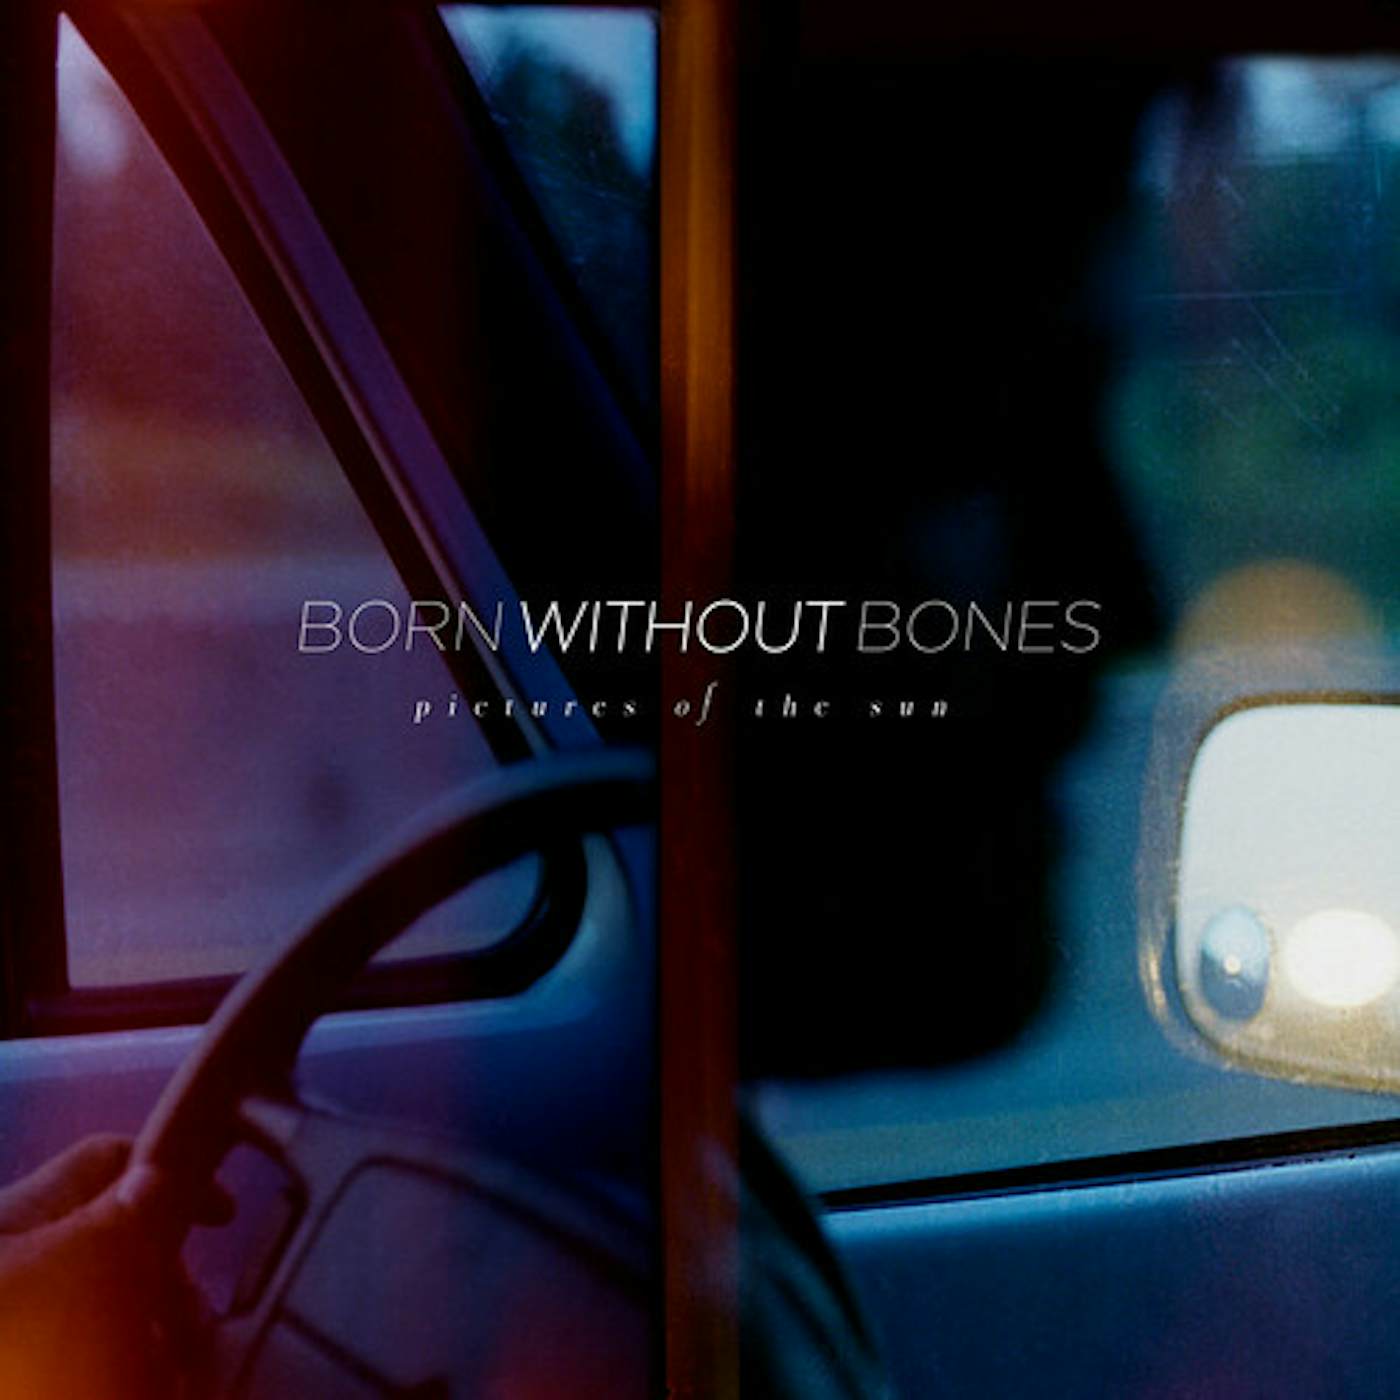 Born Without Bones Pictures of the Sun vinyl record